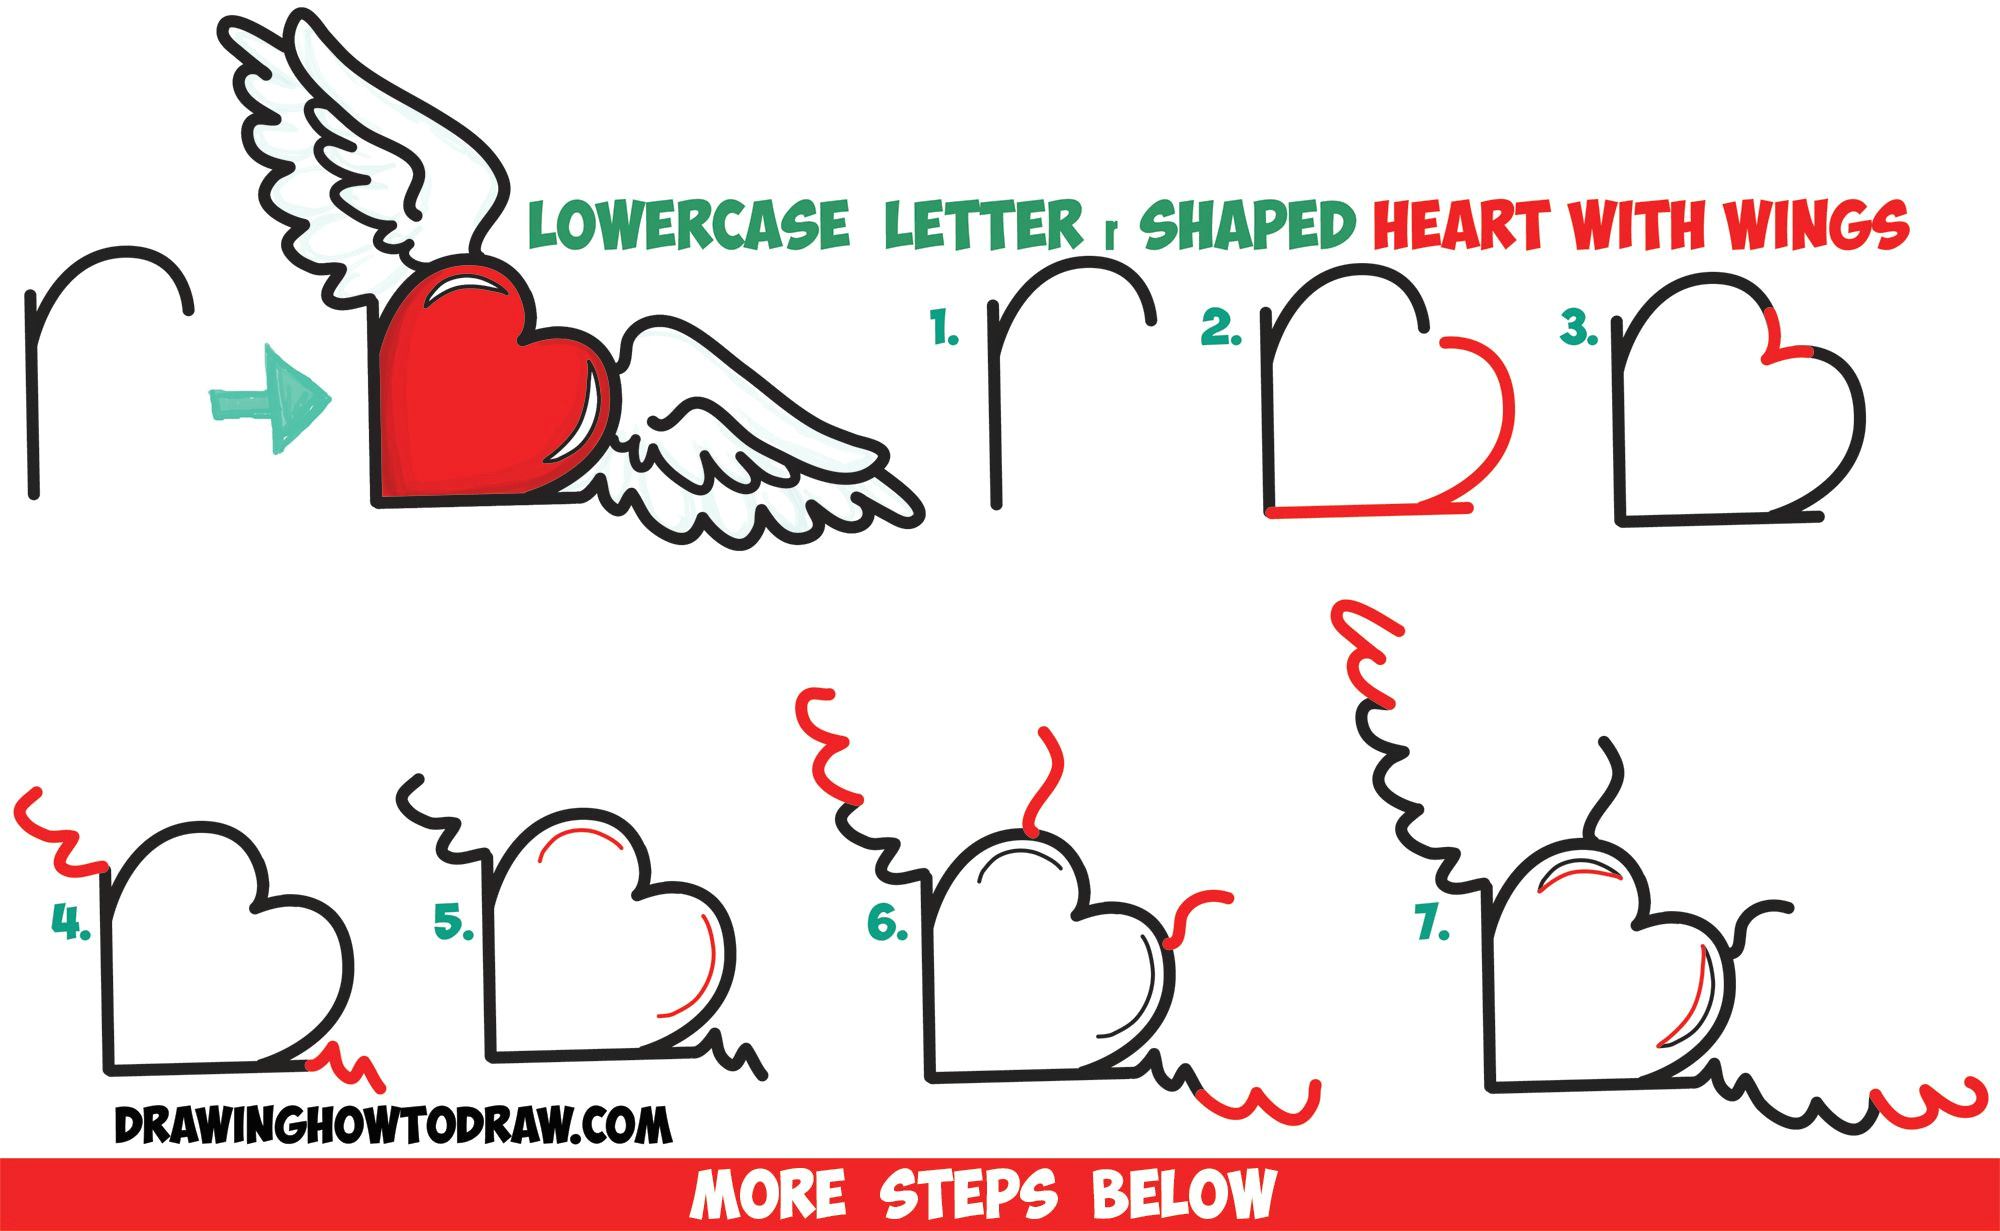 Easy Drawing Using Letters How to Draw Heart with Wings From Lowercase Letter R Shapes Easy